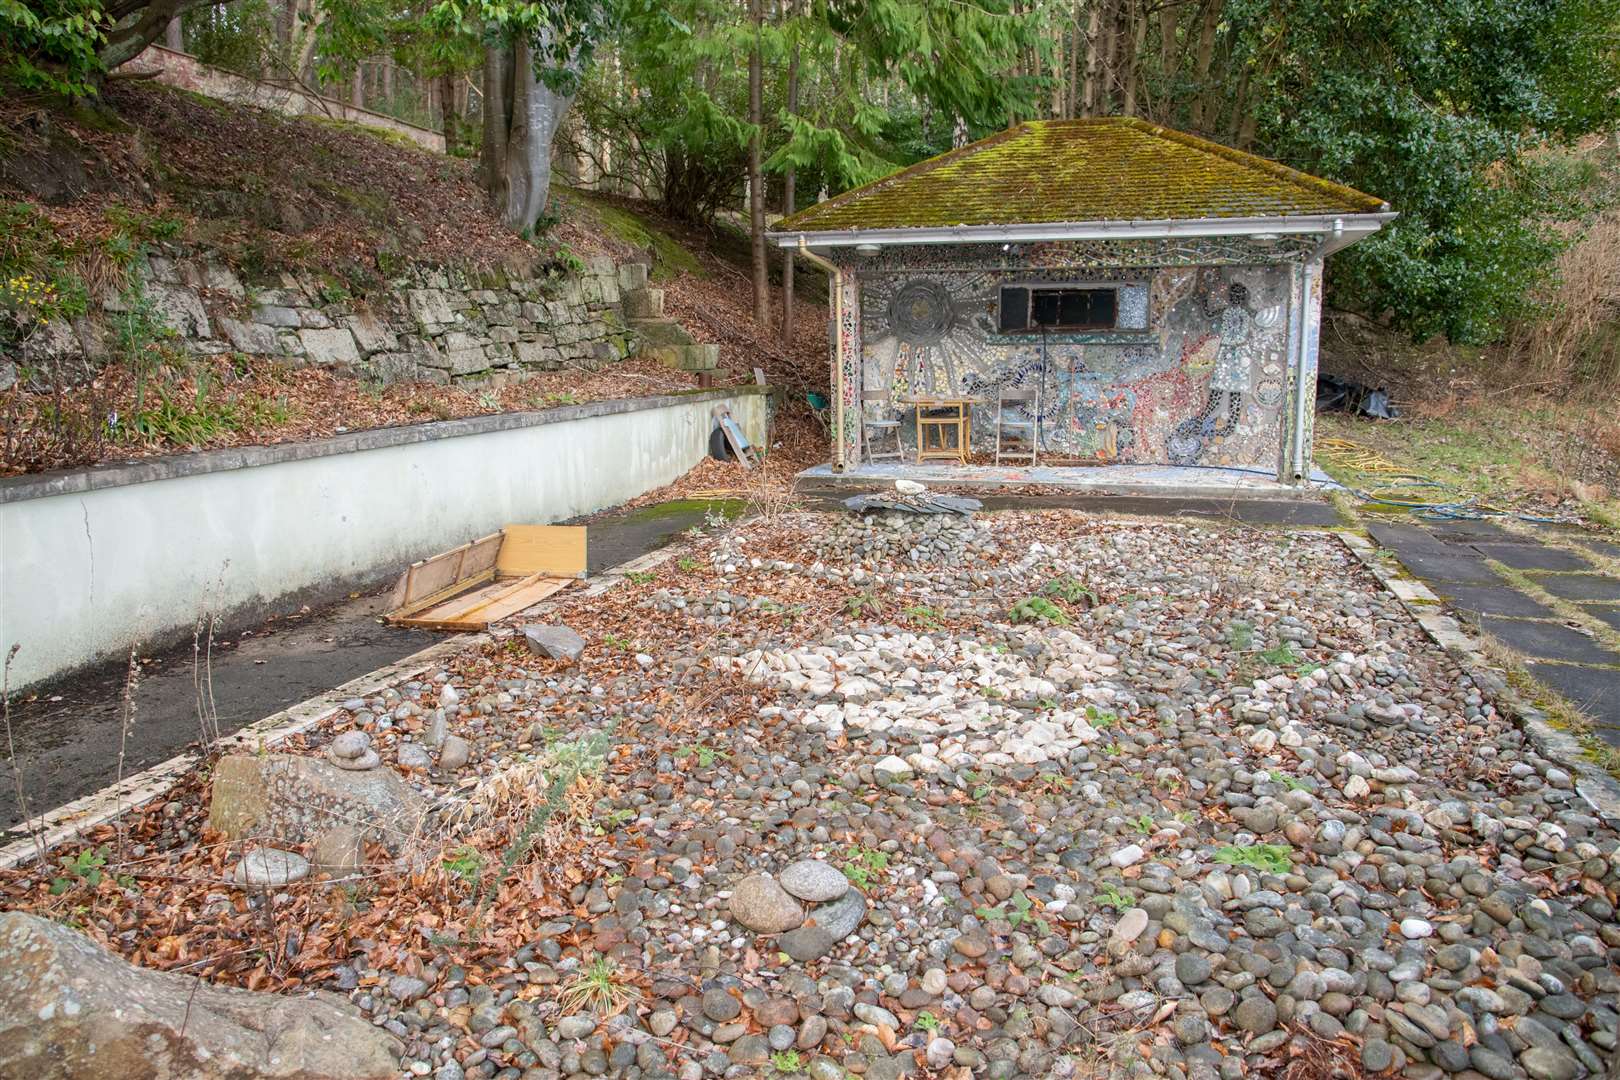 The former swimming pool and pool house at the back of the site.